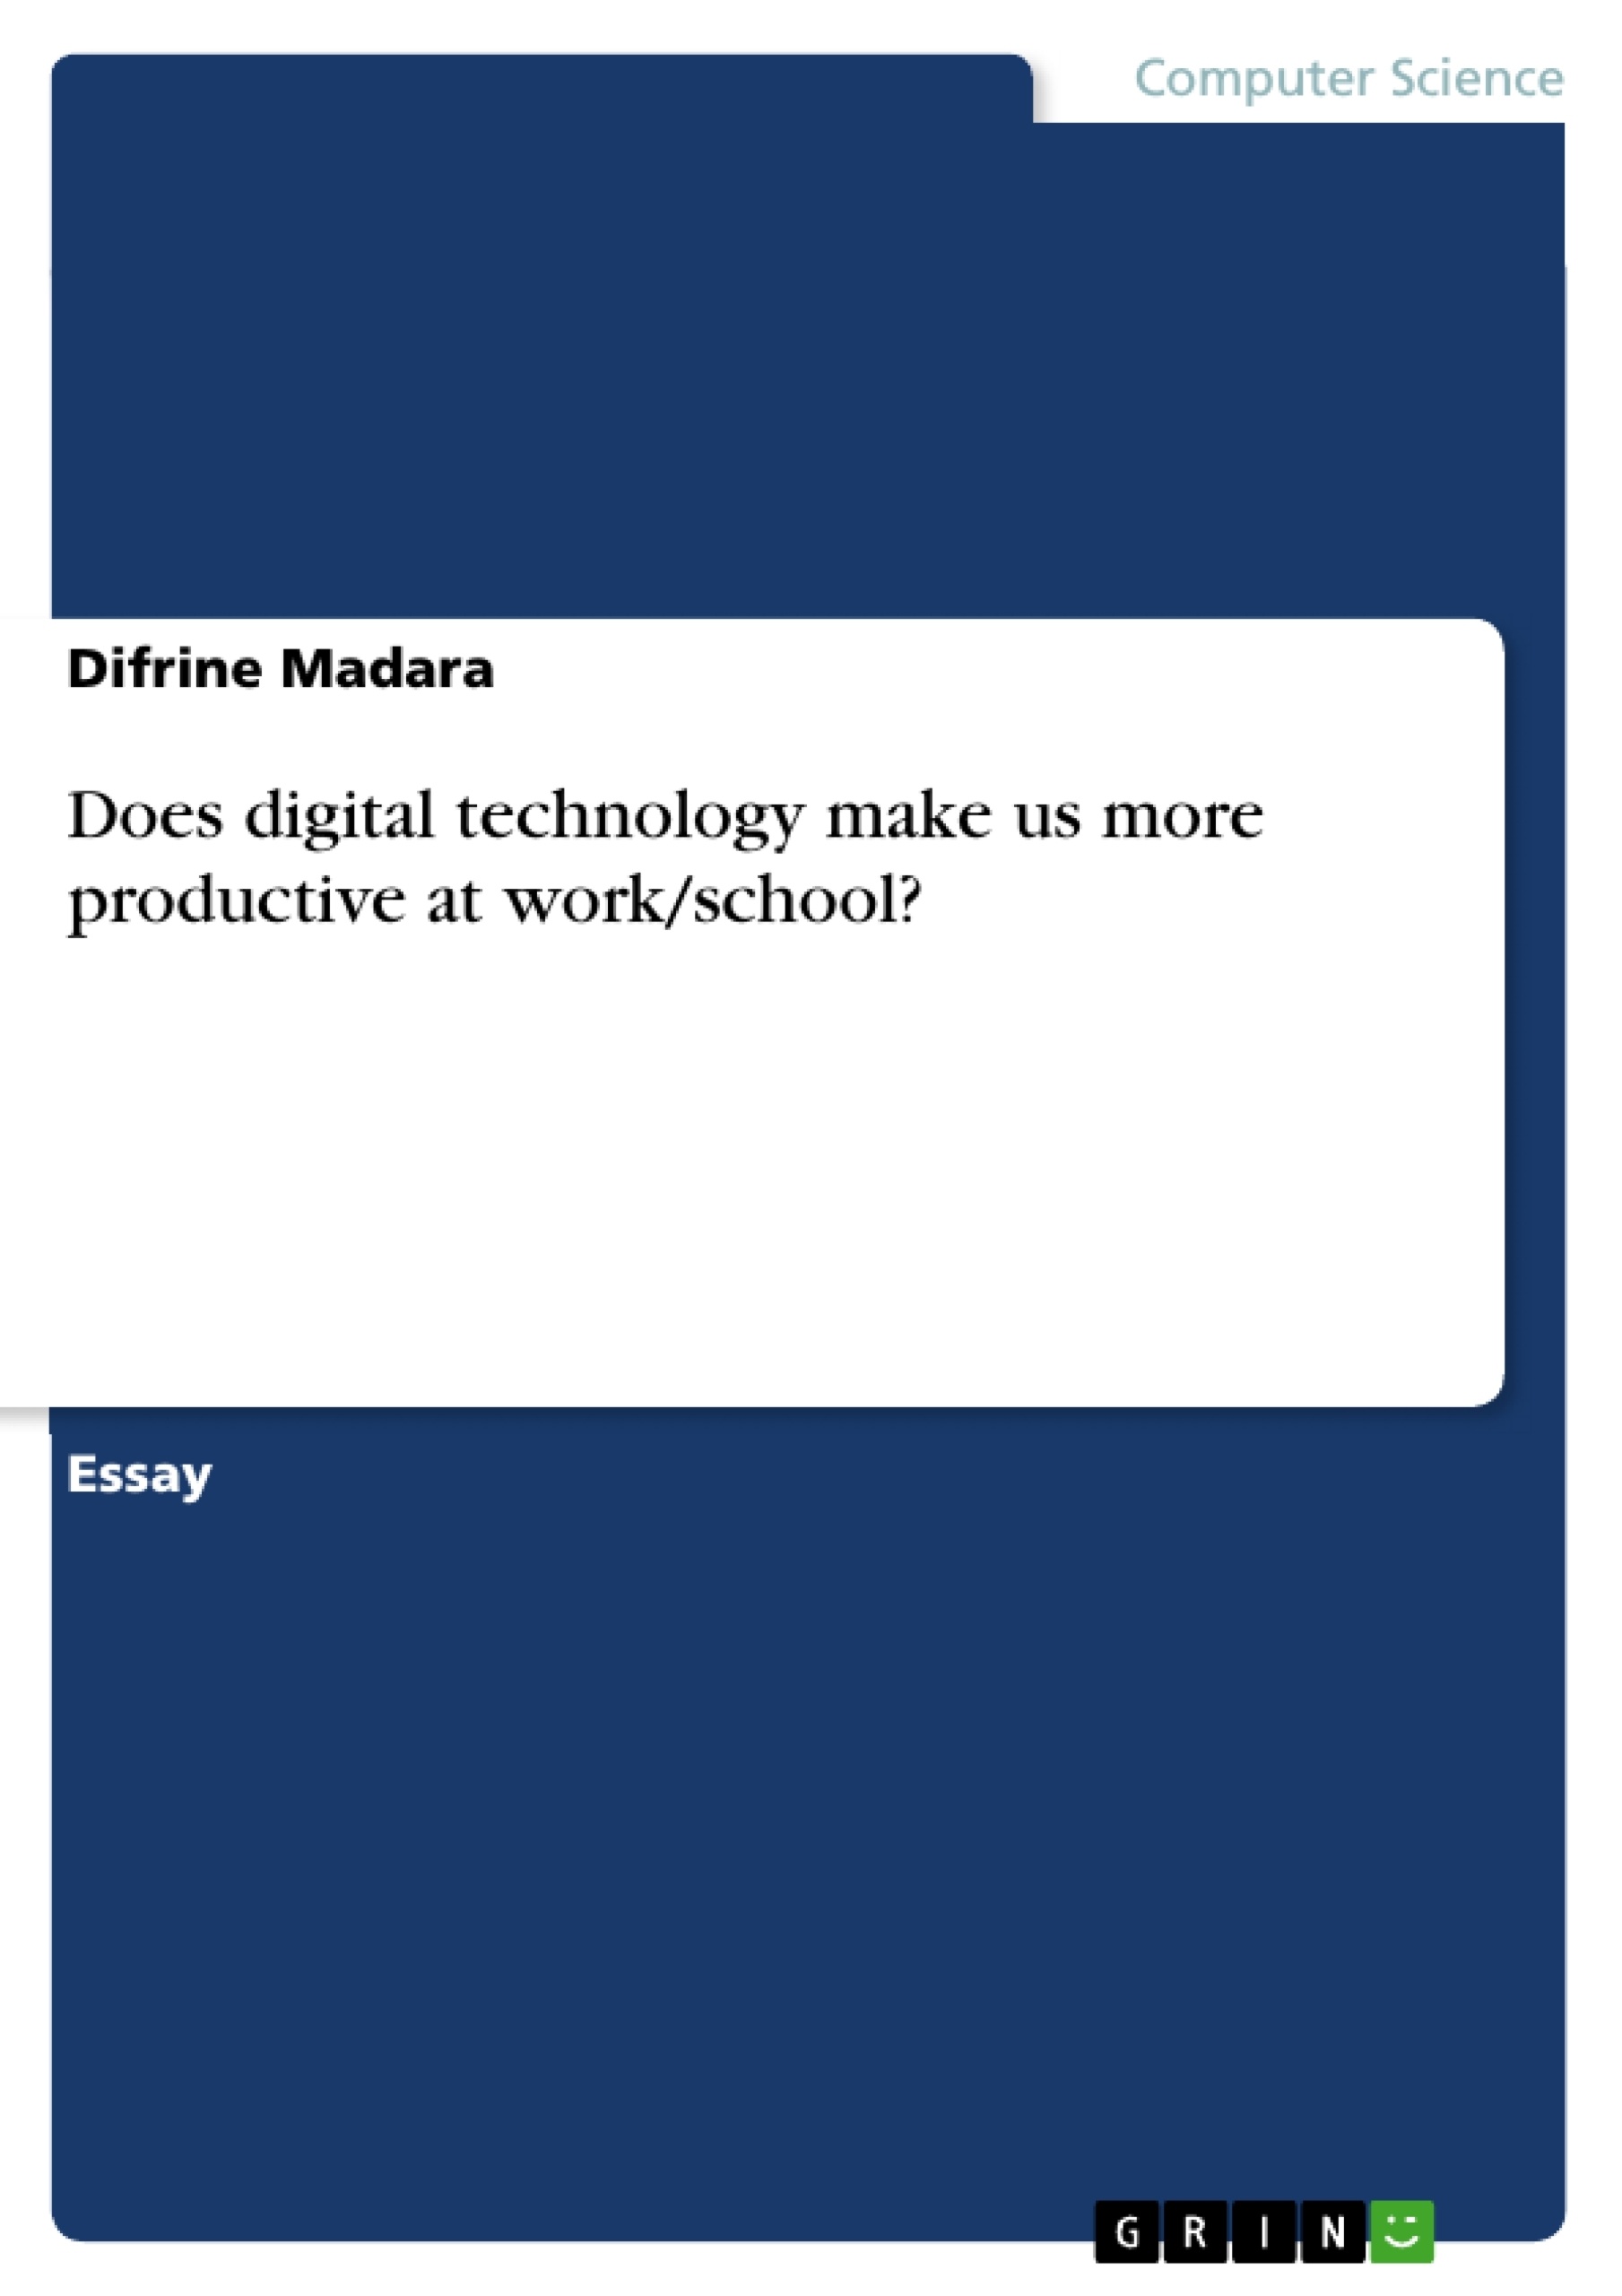 Does digital technology make us more productive at work/school? - GRIN